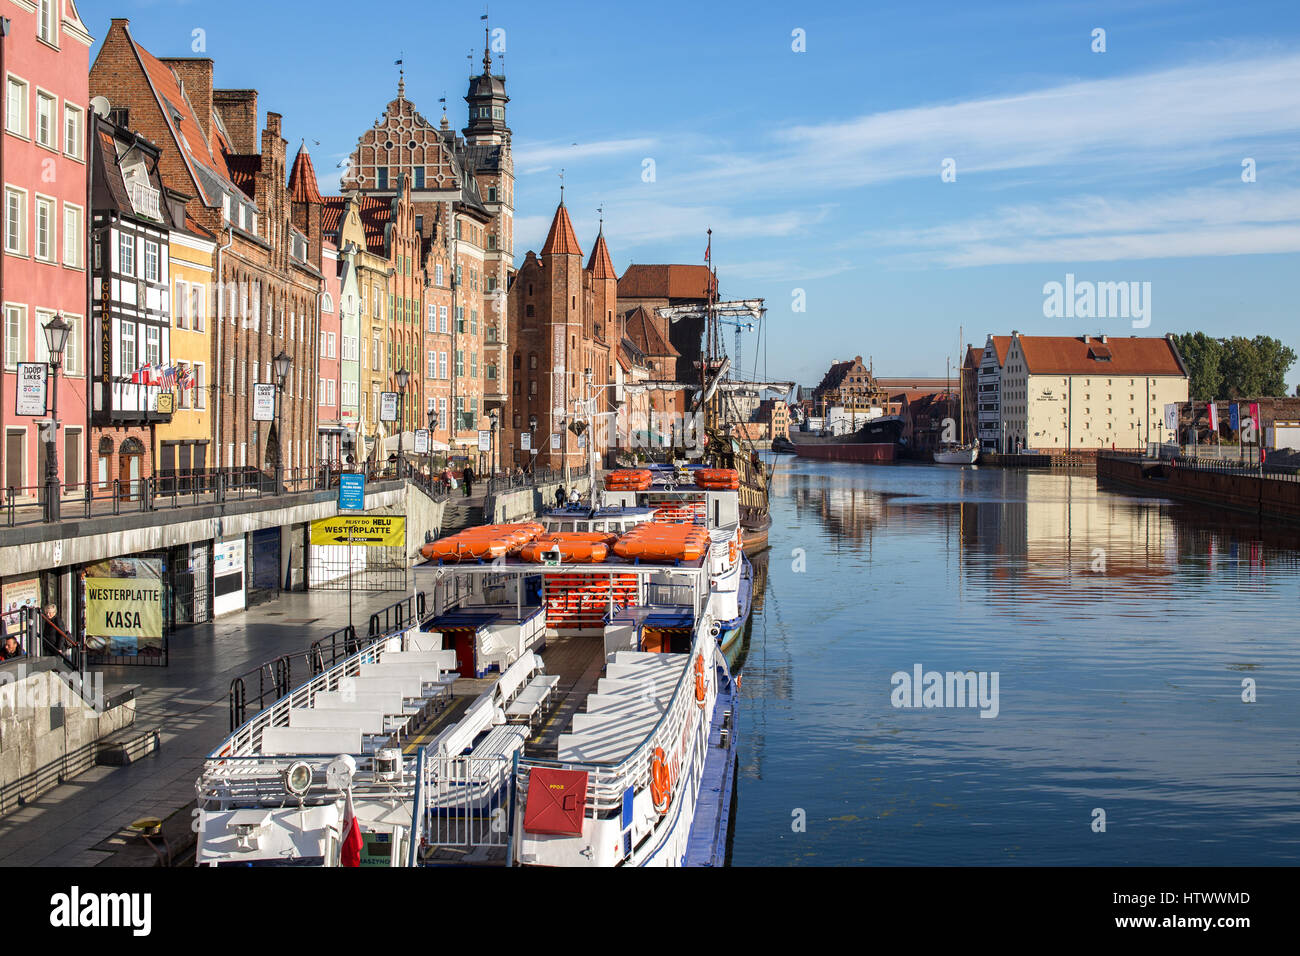 Gdansk, Danzig an old medieval polish and german city, the old granary - Krantor. View on sunny day with blue sky from the river side. Motlawa, Motlau Stock Photo